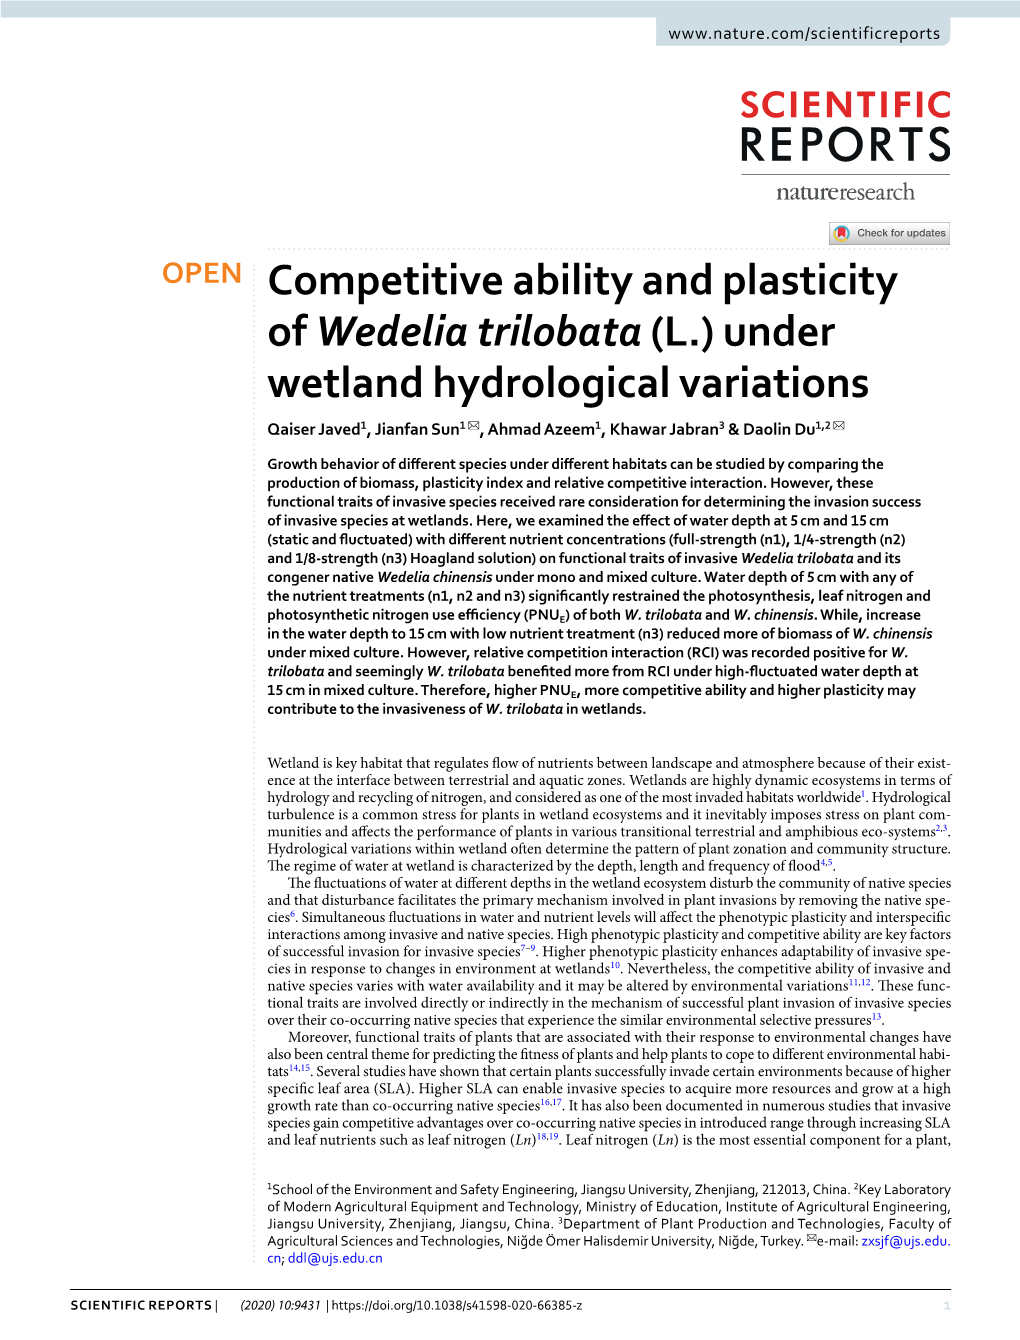 Competitive Ability and Plasticity of Wedelia Trilobata